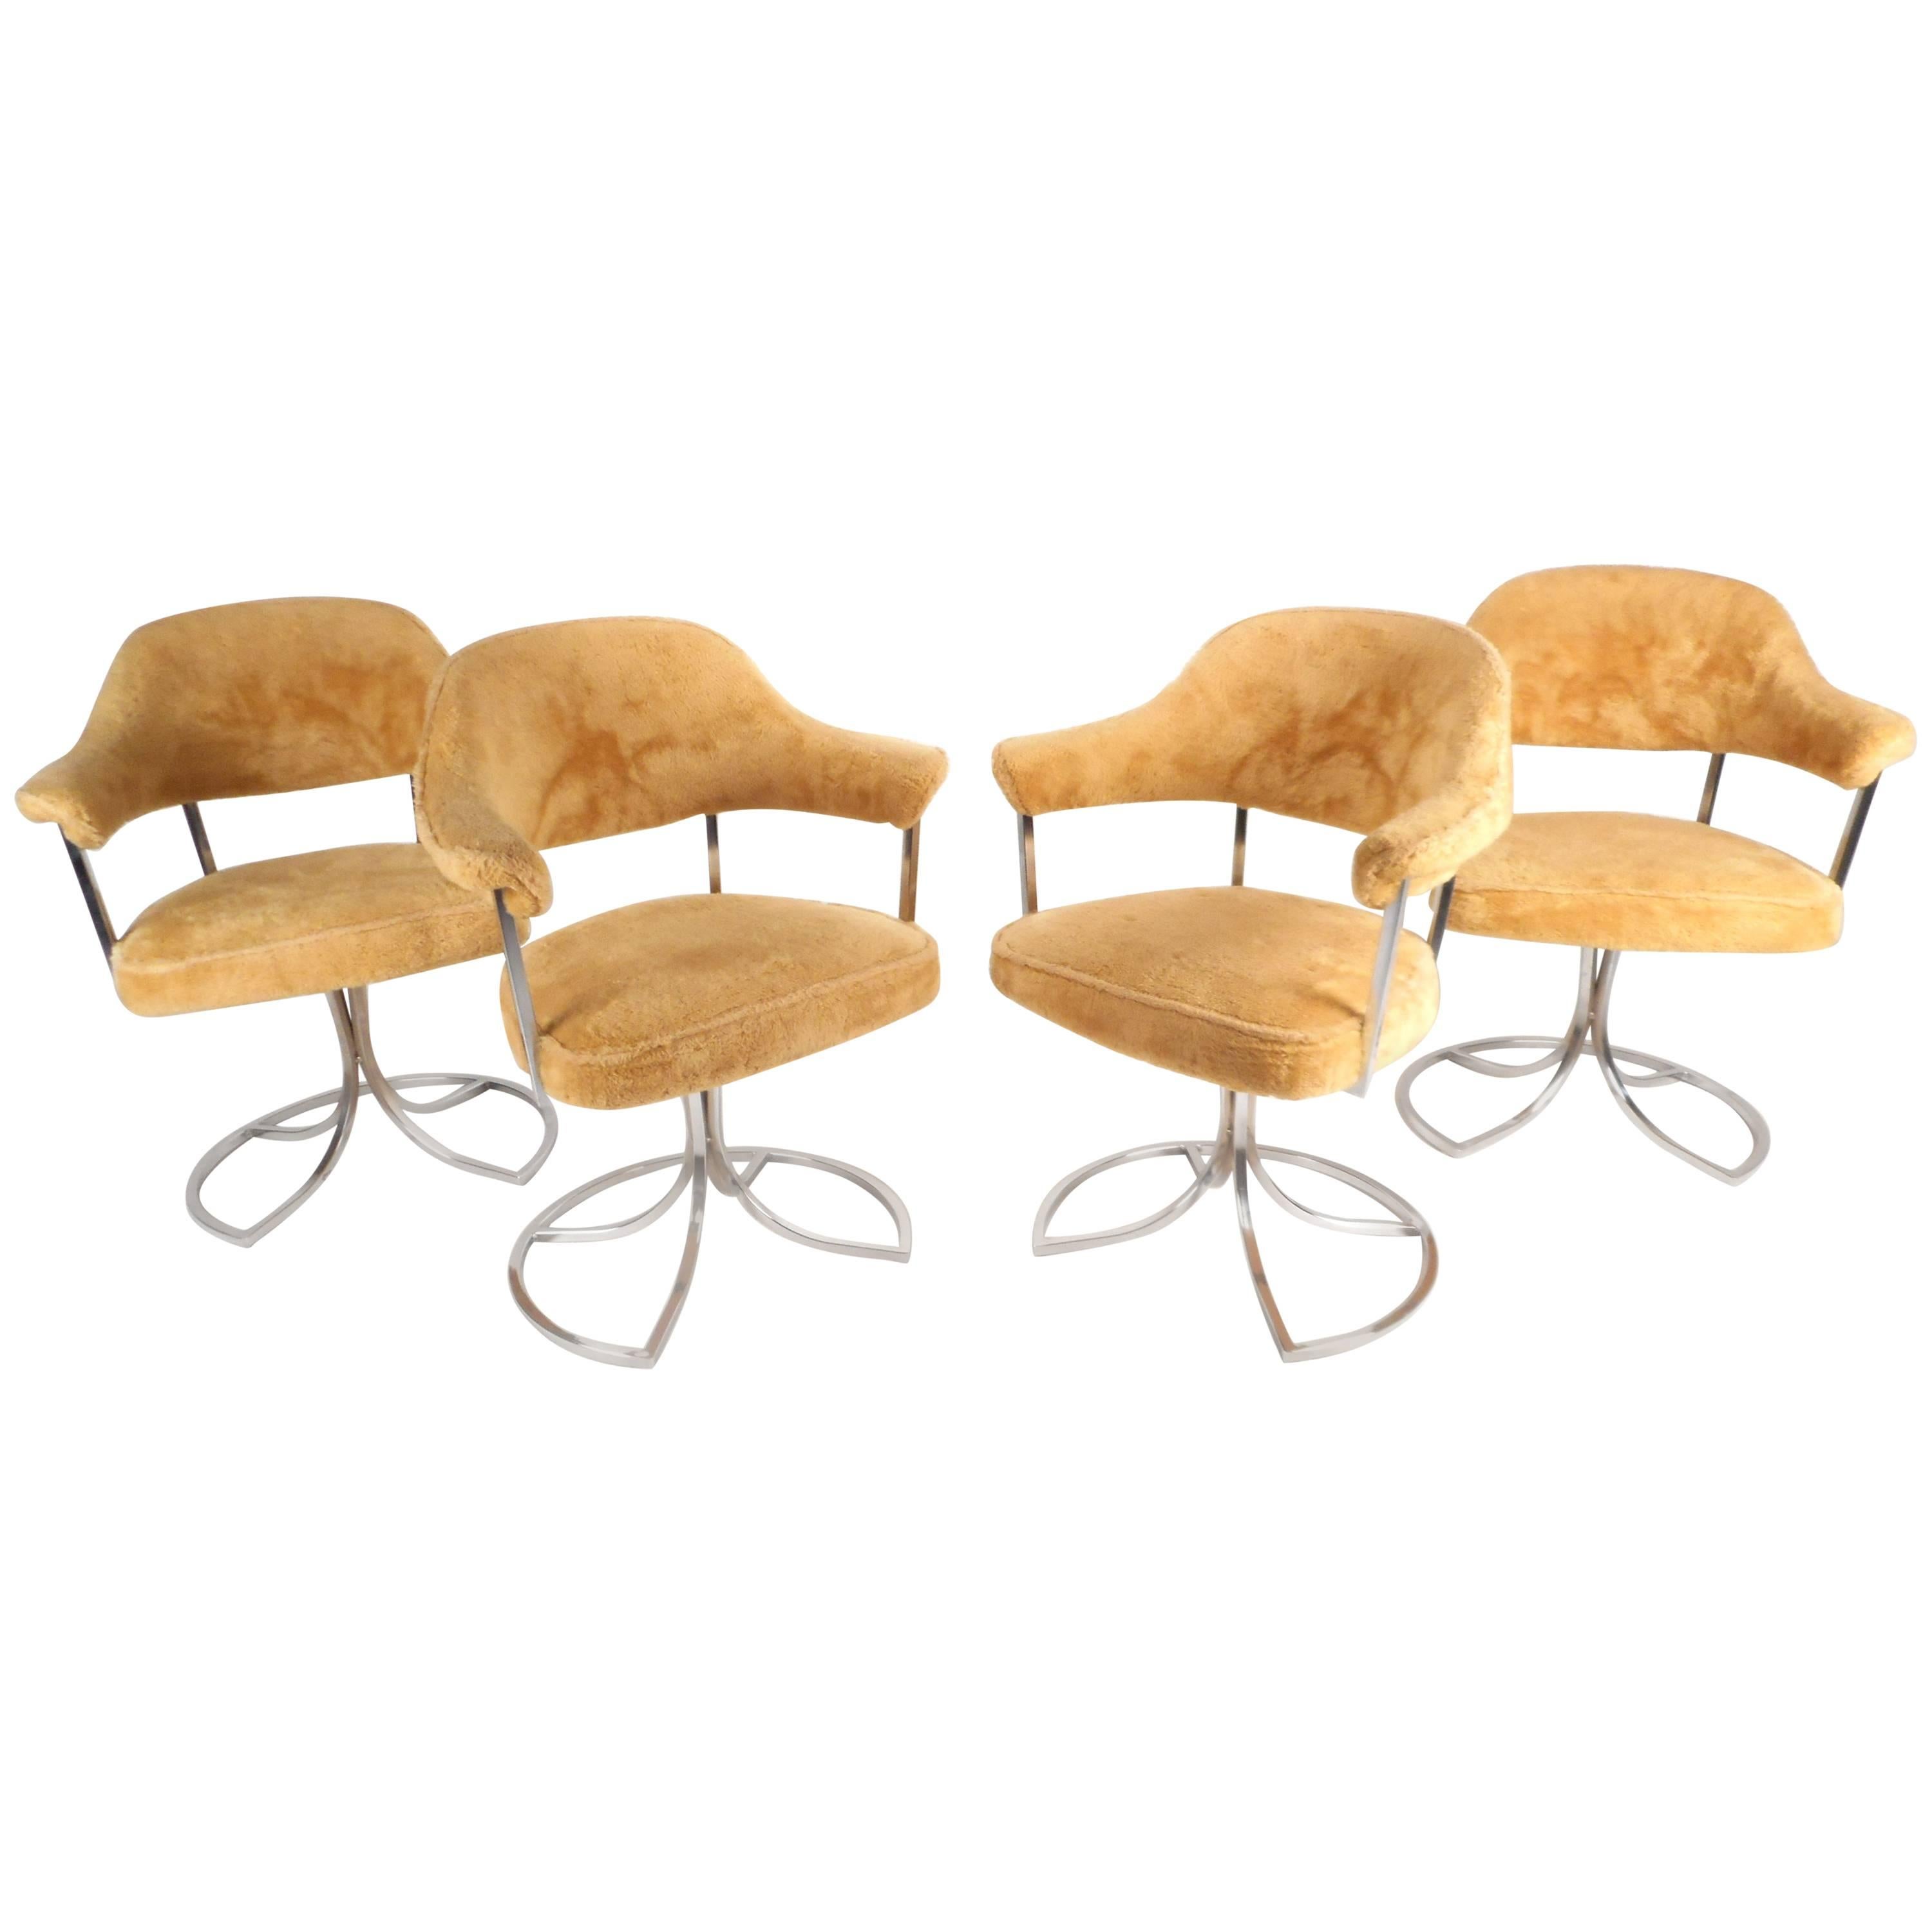 Stylish Mid-Century Modern Swivel Tulip Chairs by Cal-Style Furniture